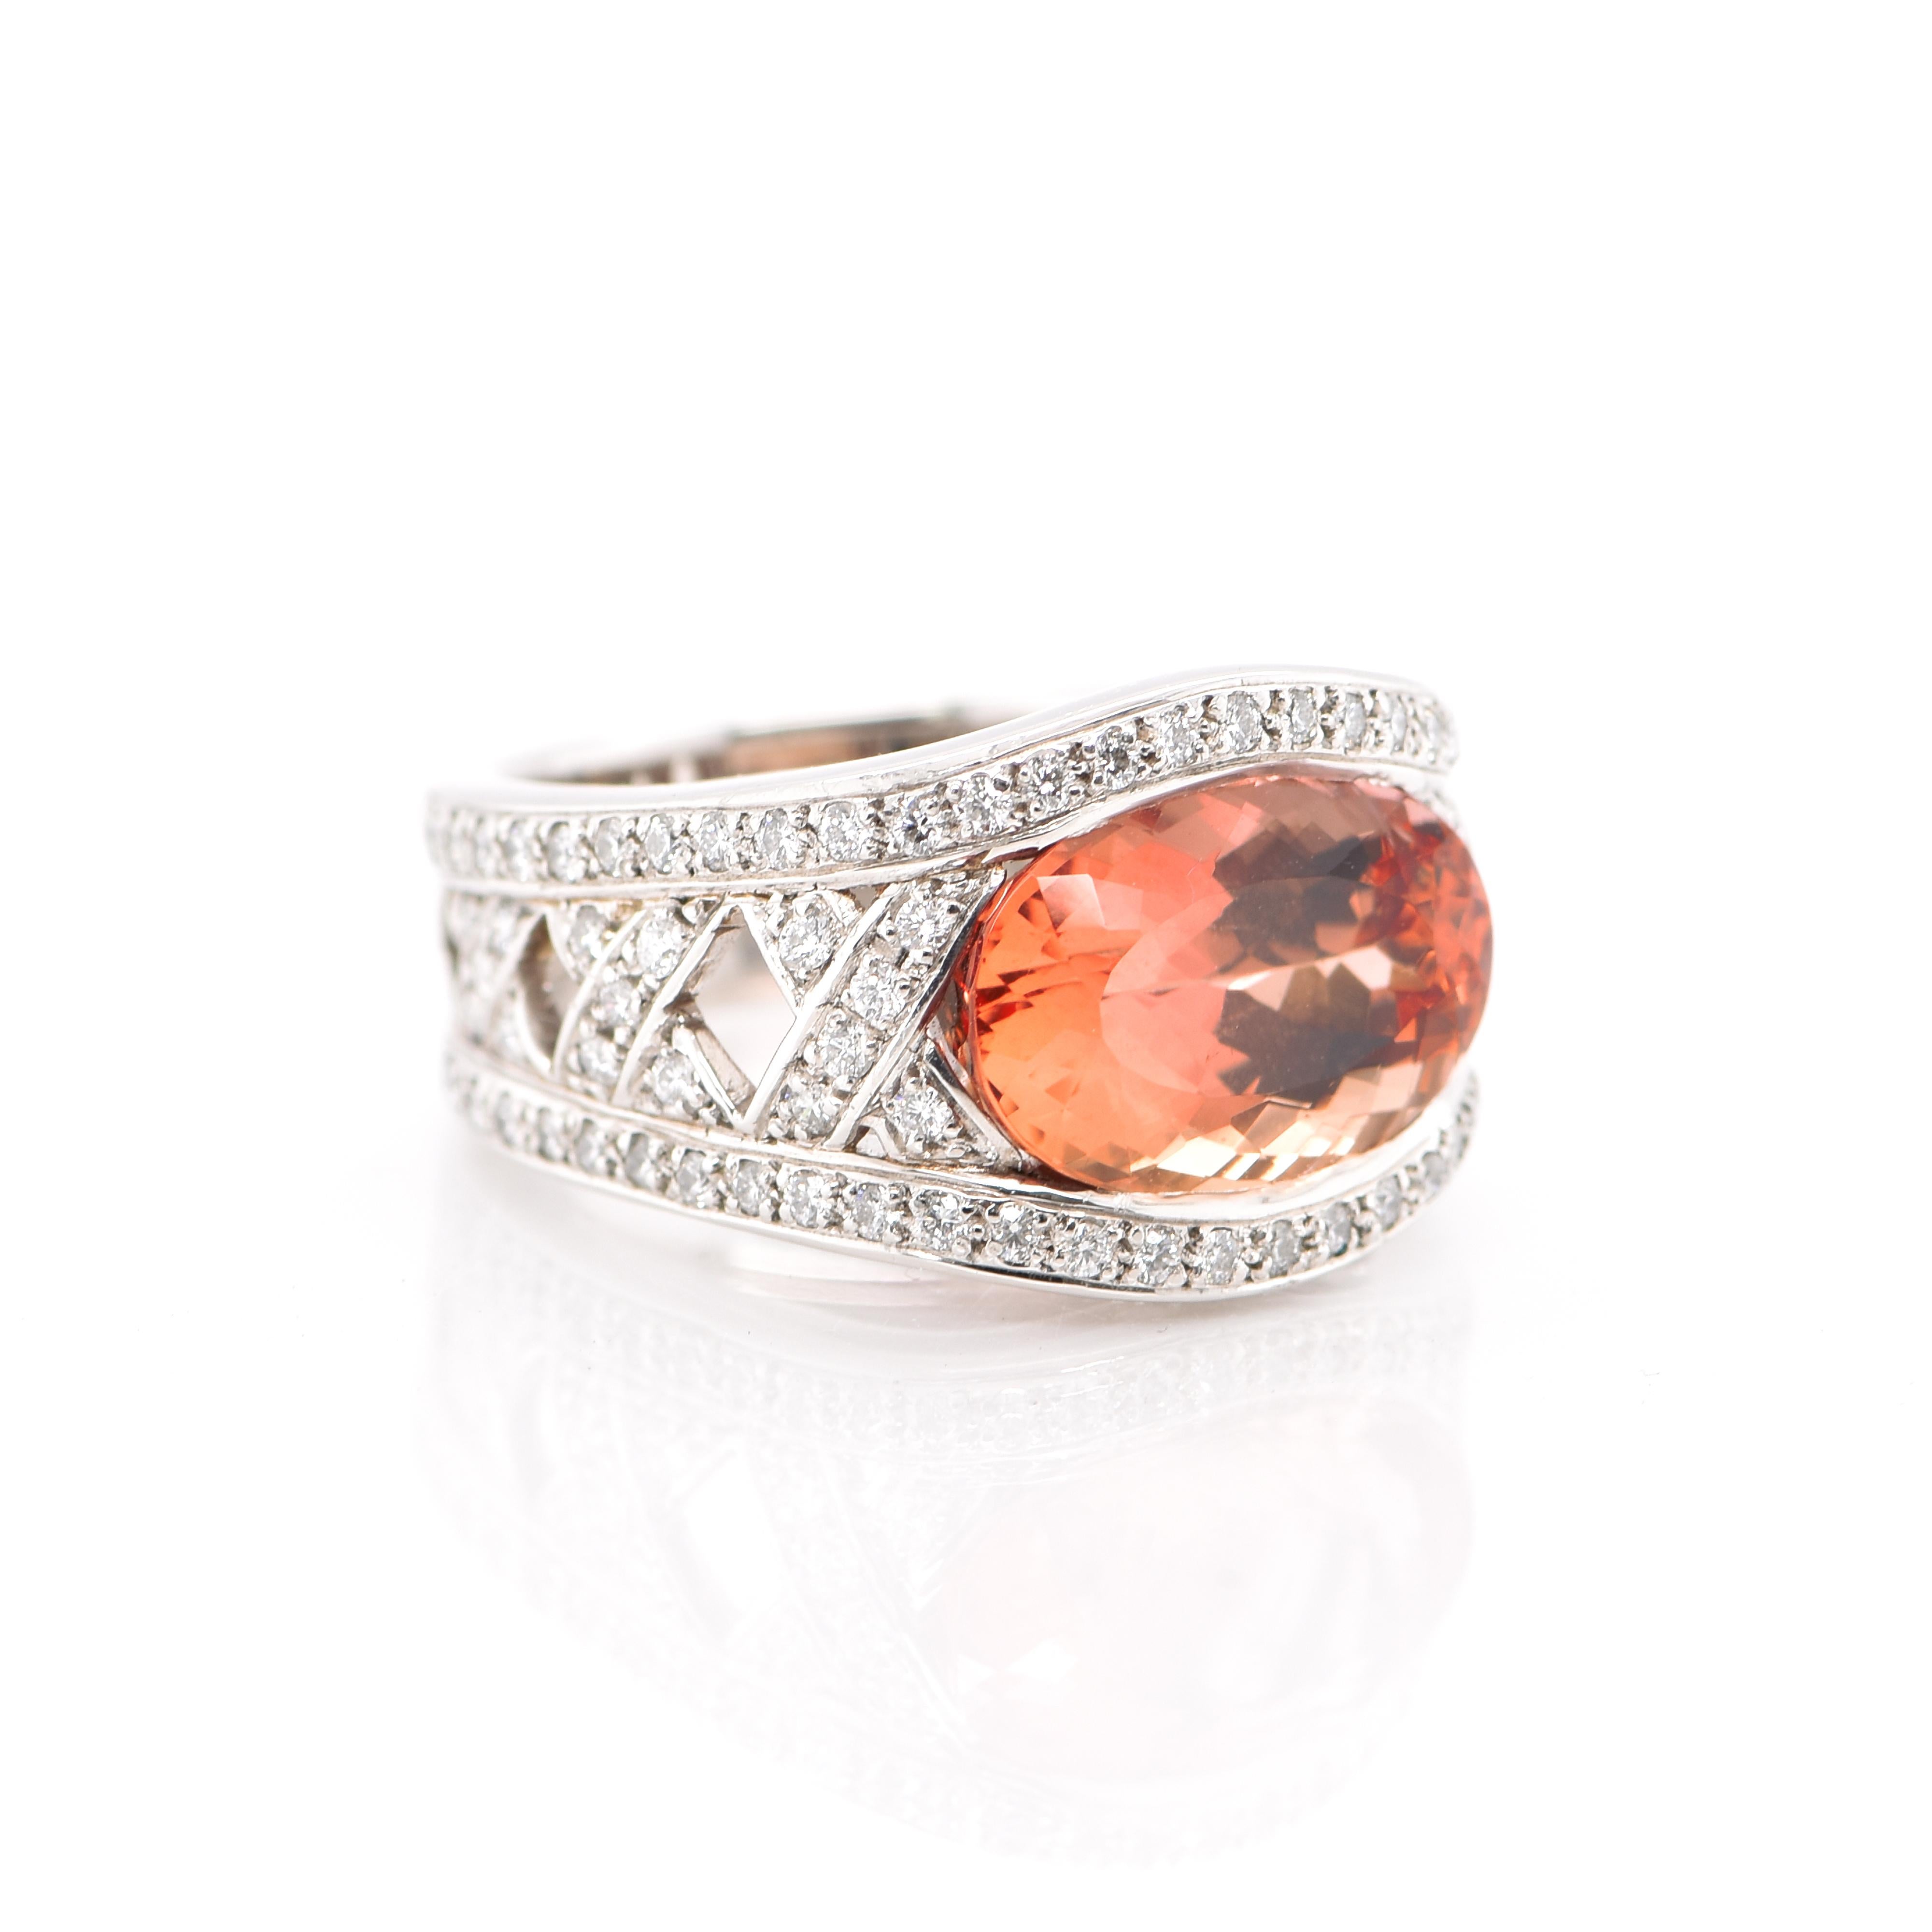 Oval Cut 6.38 Carat Imperial Topaz and Diamond Cocktail Ring Set in Platinum